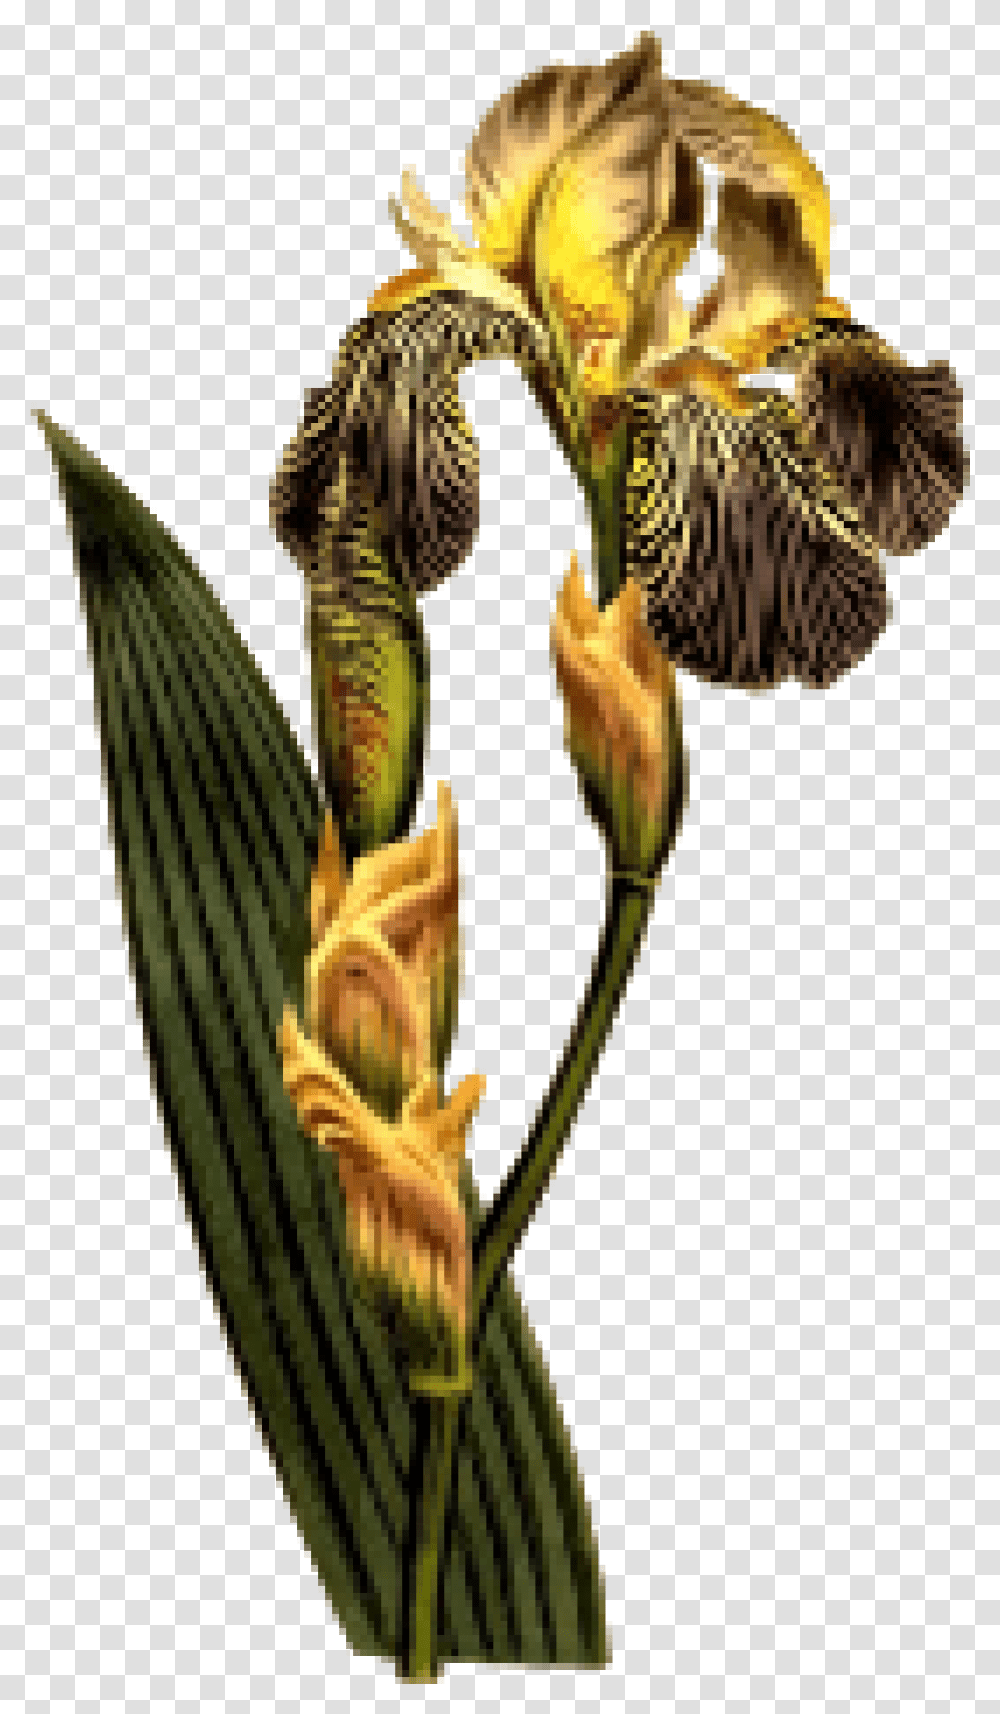 Red Flower Clip Arts For Web Clip Arts Free Iris Botanical, Plant, Blossom, Amaryllidaceae, Daffodil Transparent Png